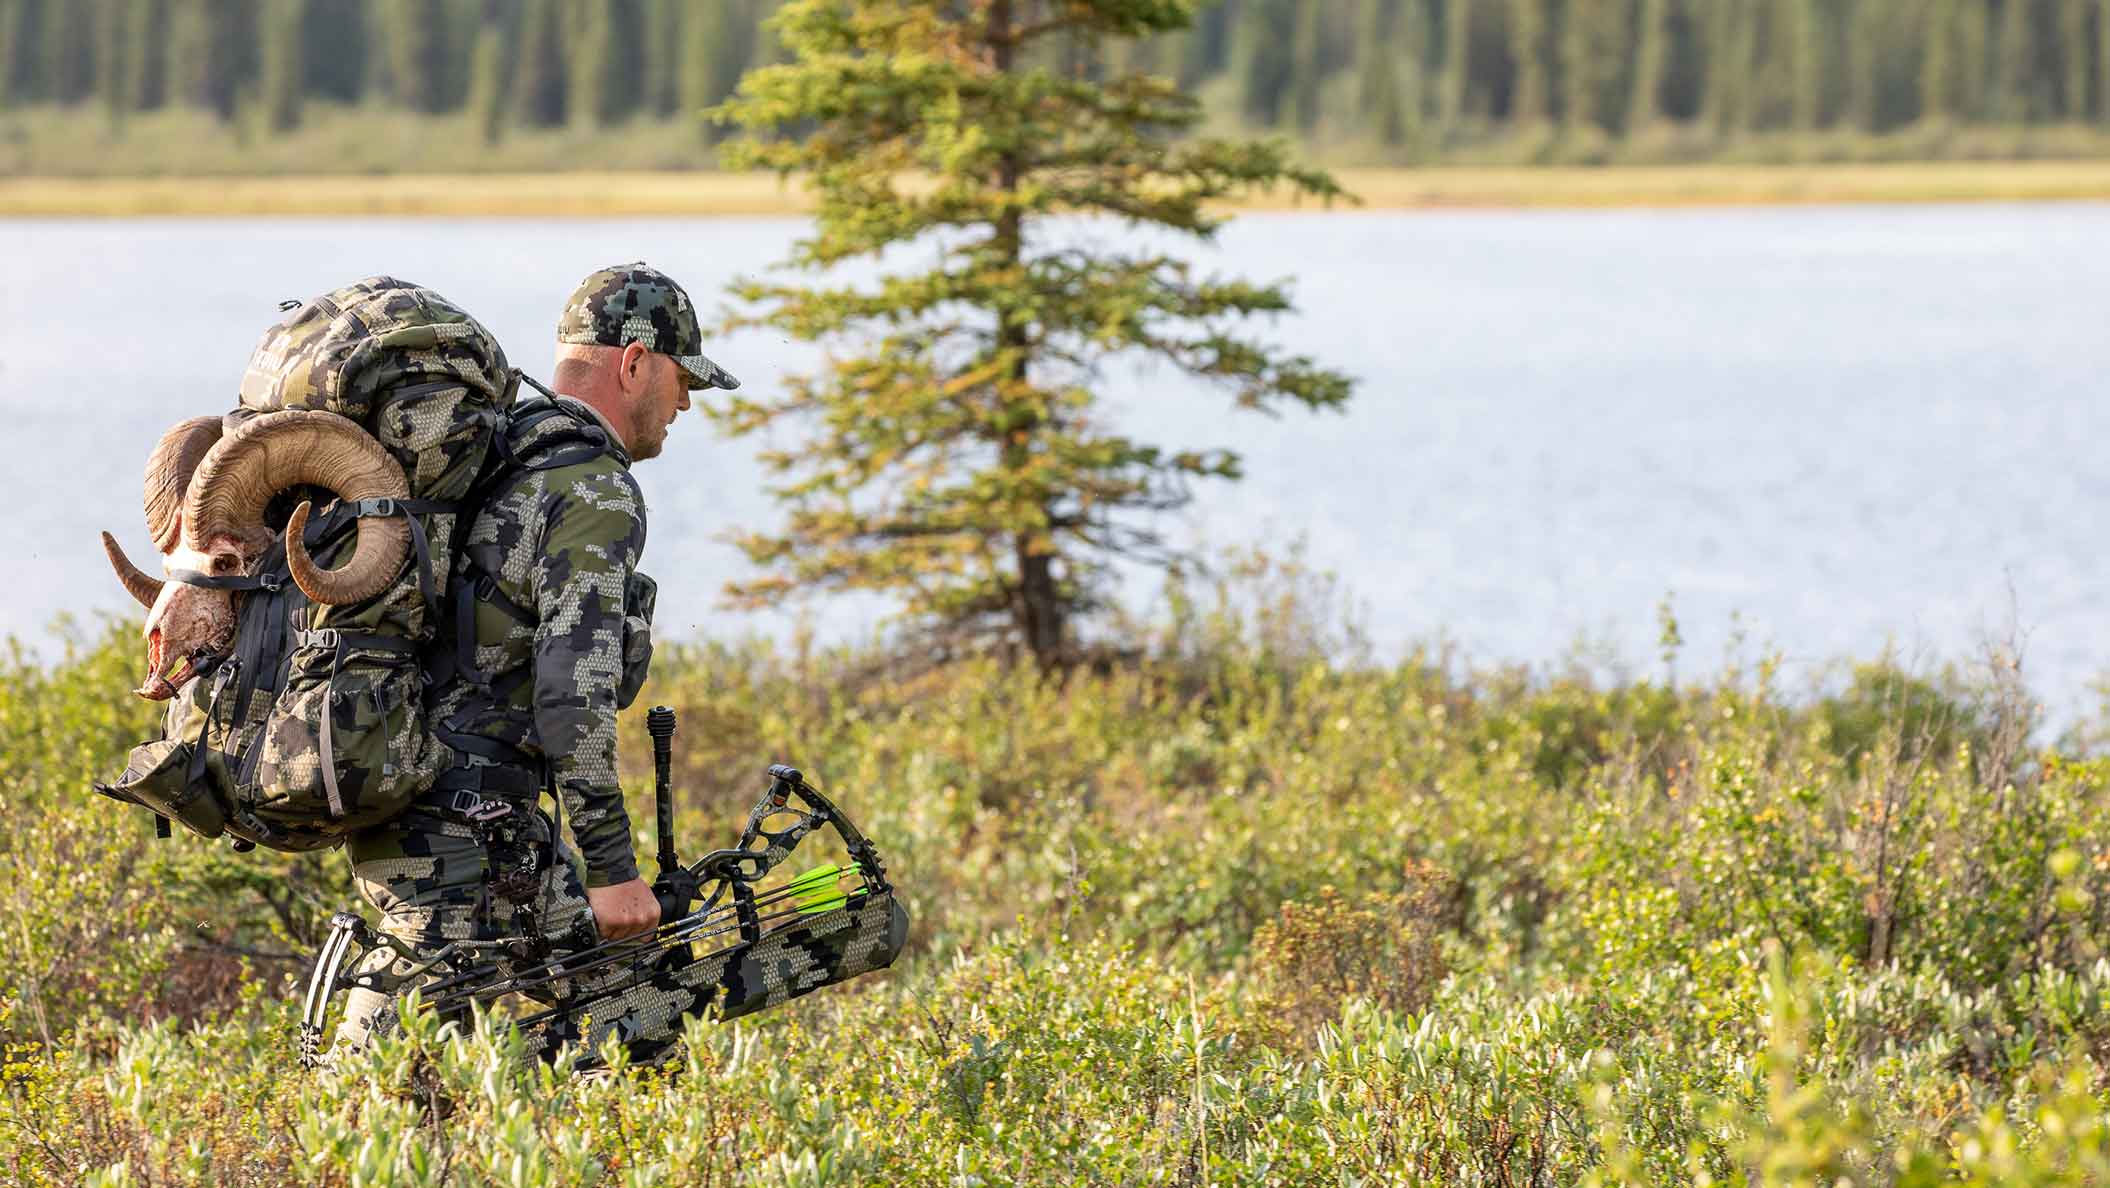 Hunting Gear Care and Maintenance with Grangers – KUIU